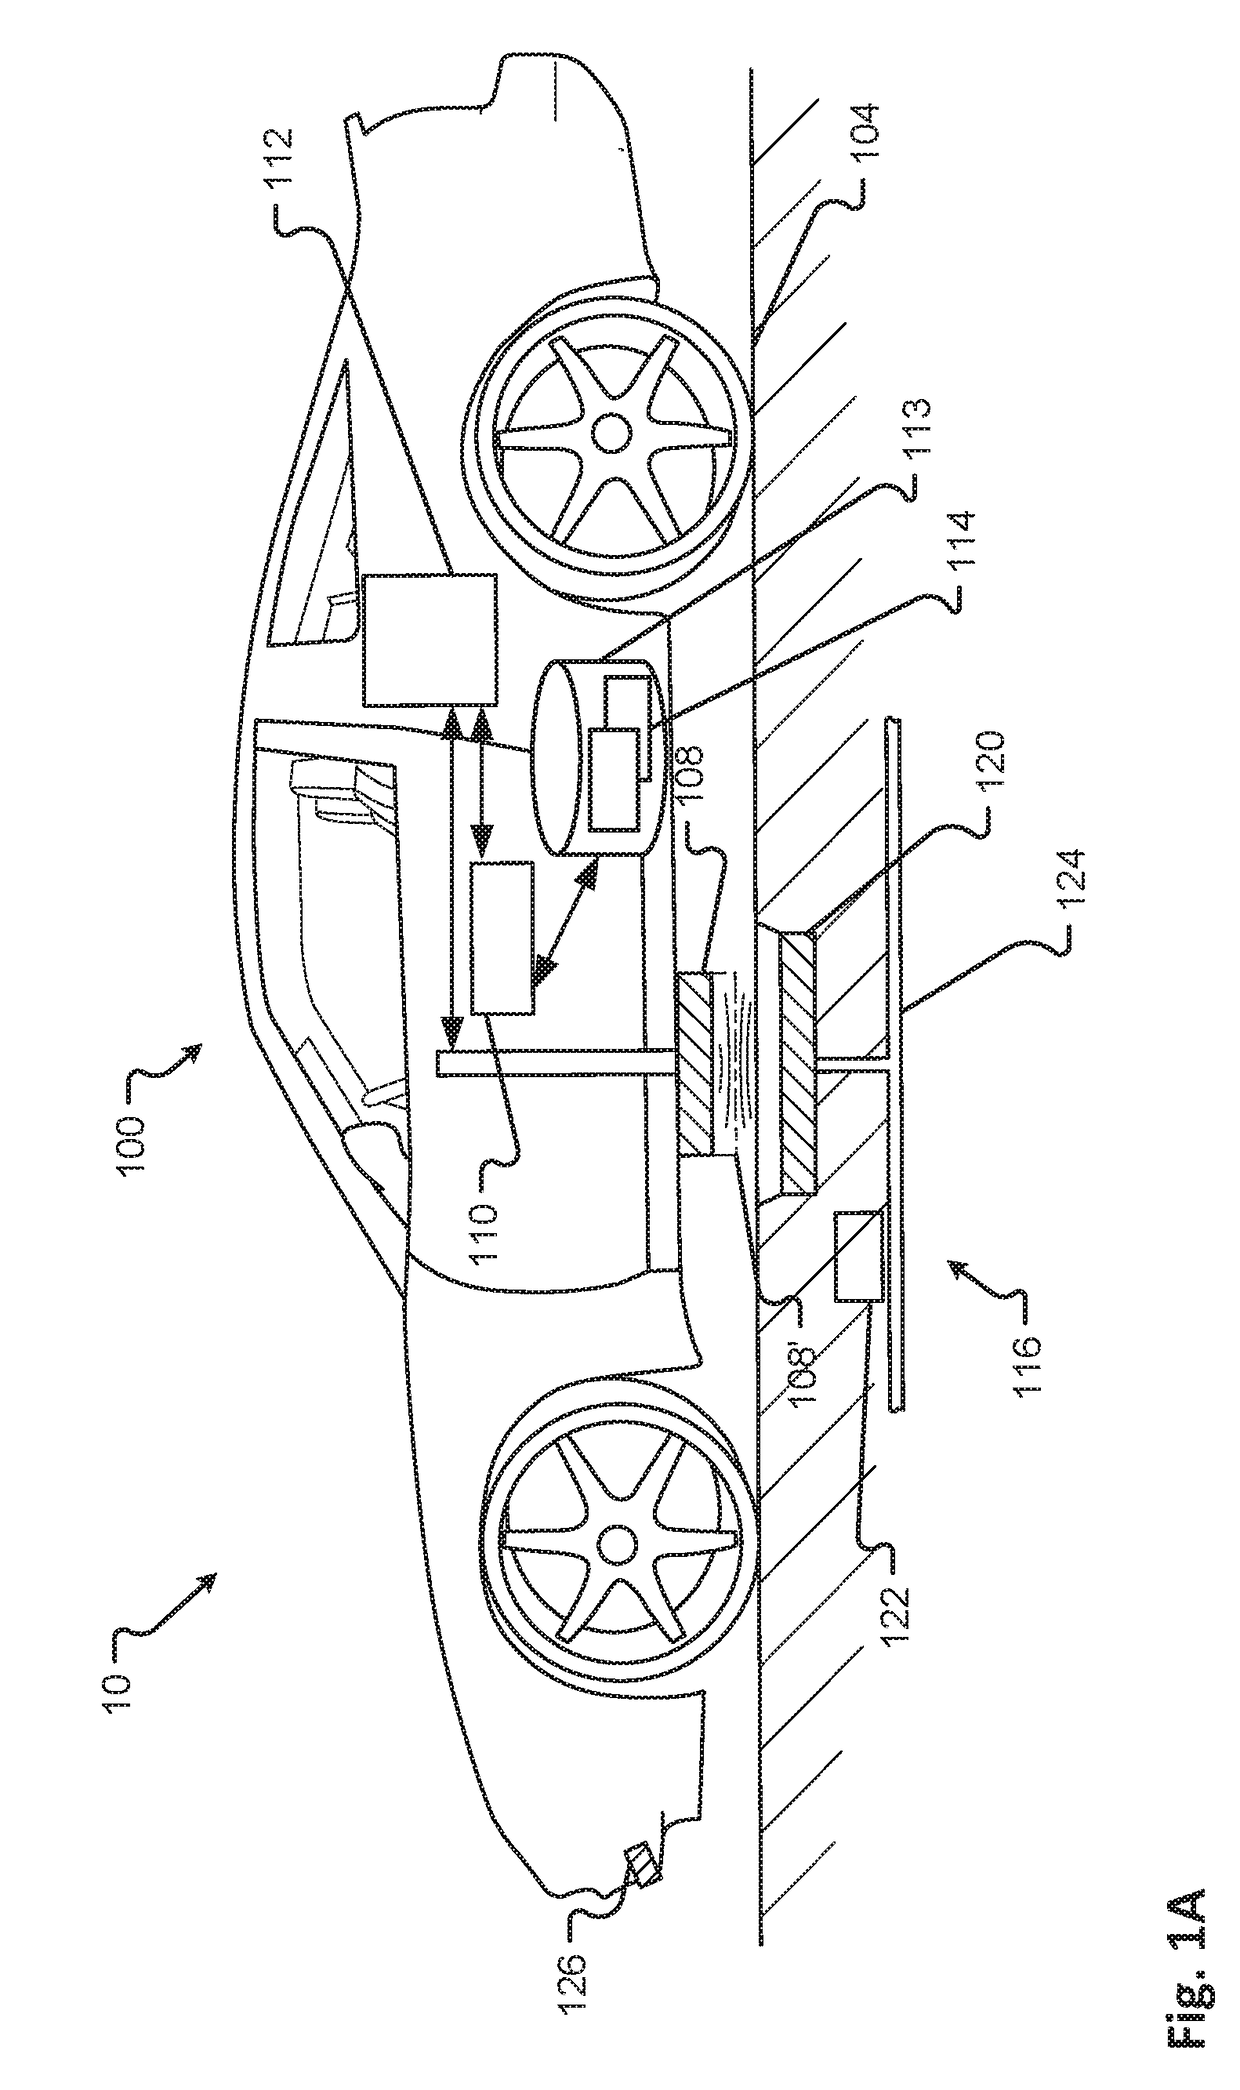 Electric vehicle charging station system and method of use